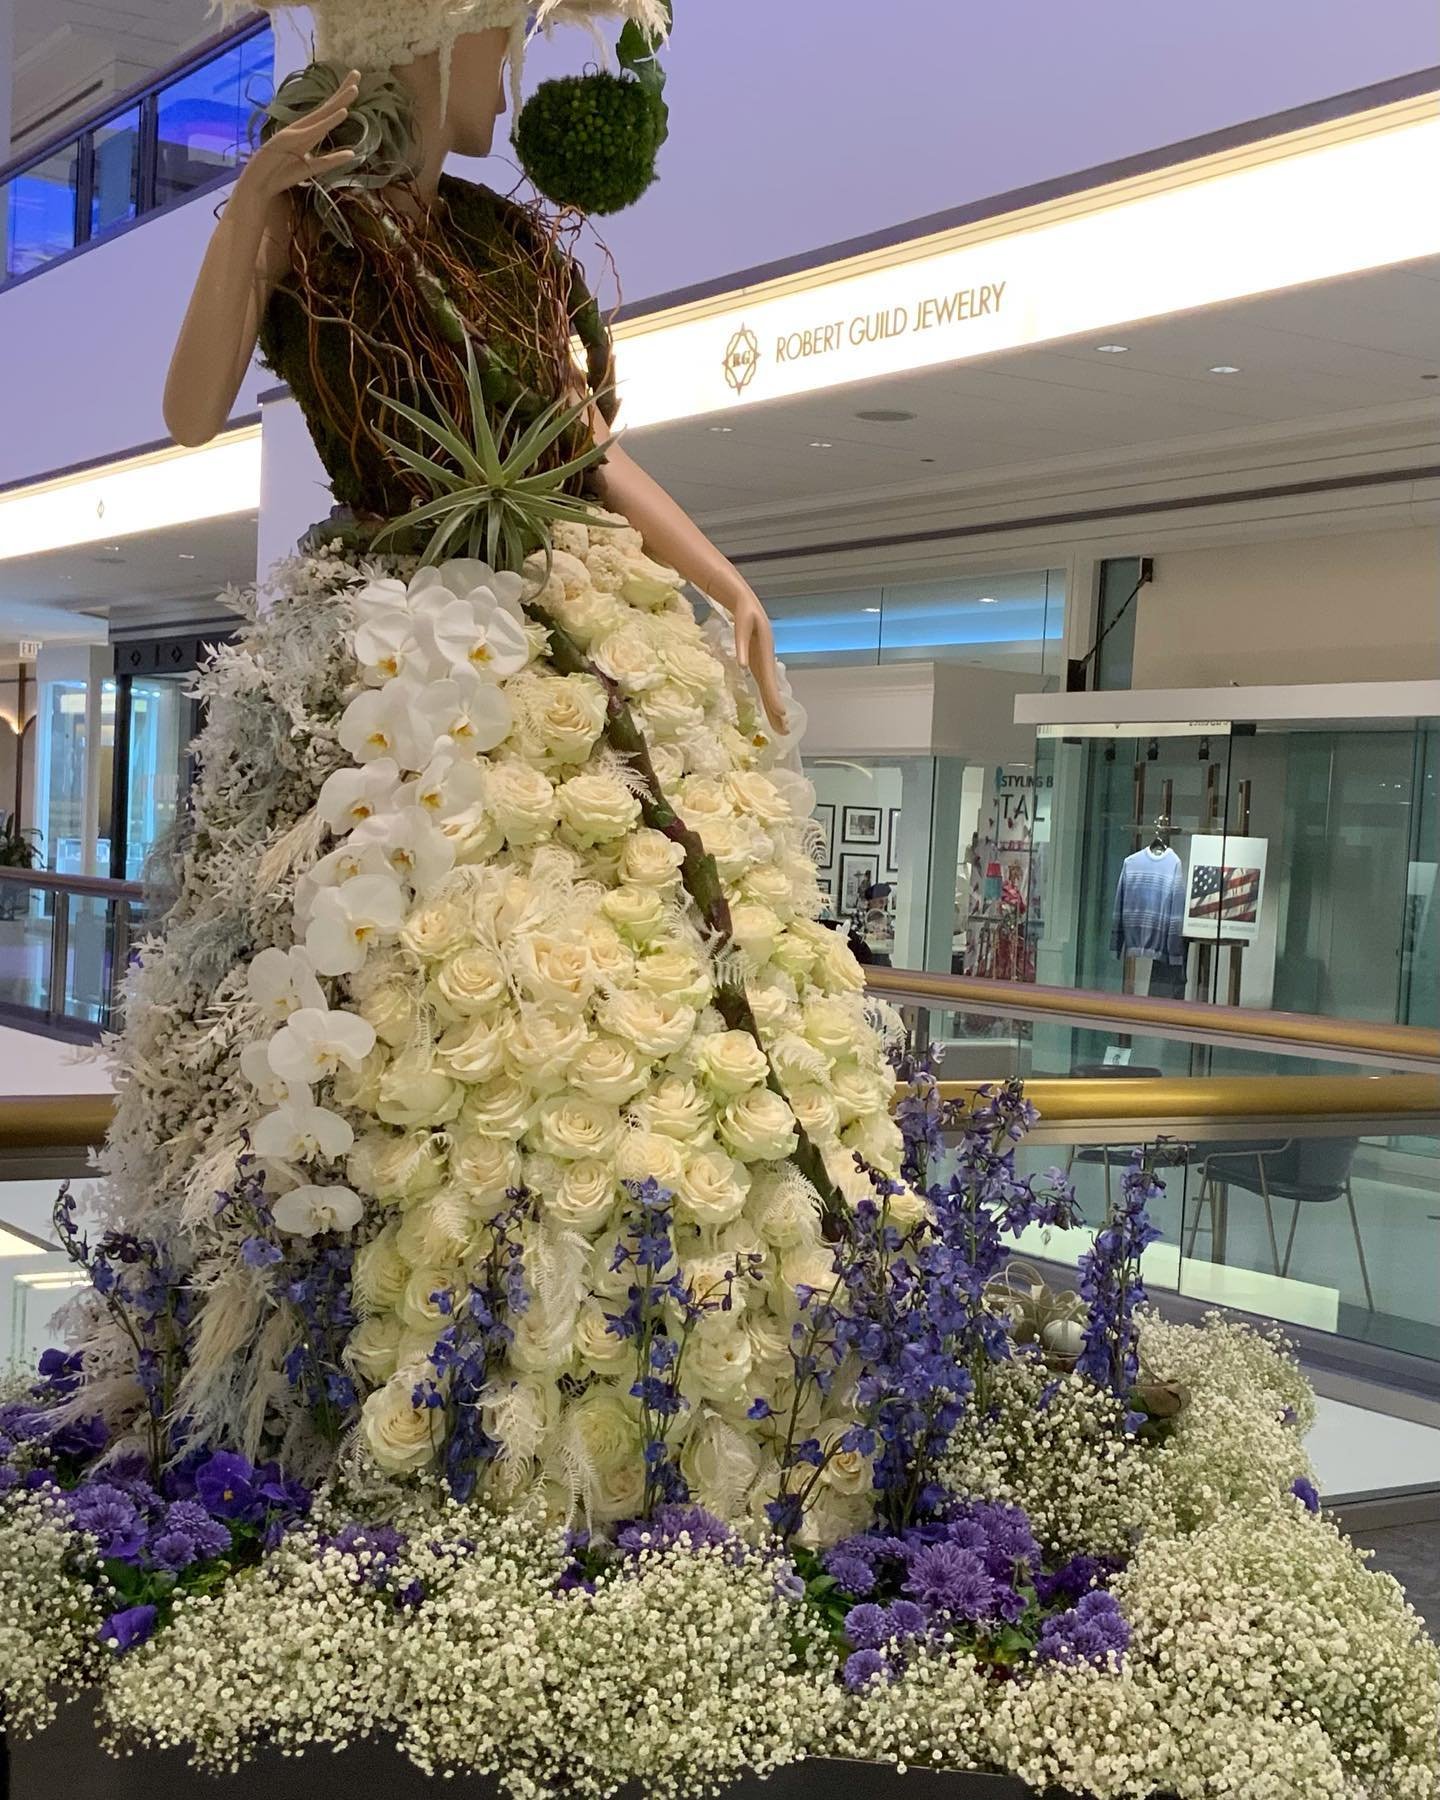 Come enjoy the spectacular floral creations right outside our door! 💐🌷🌸 Fleurs de Villes is here for 2 more days at 900 N Michigan.
#900northmichiganshops